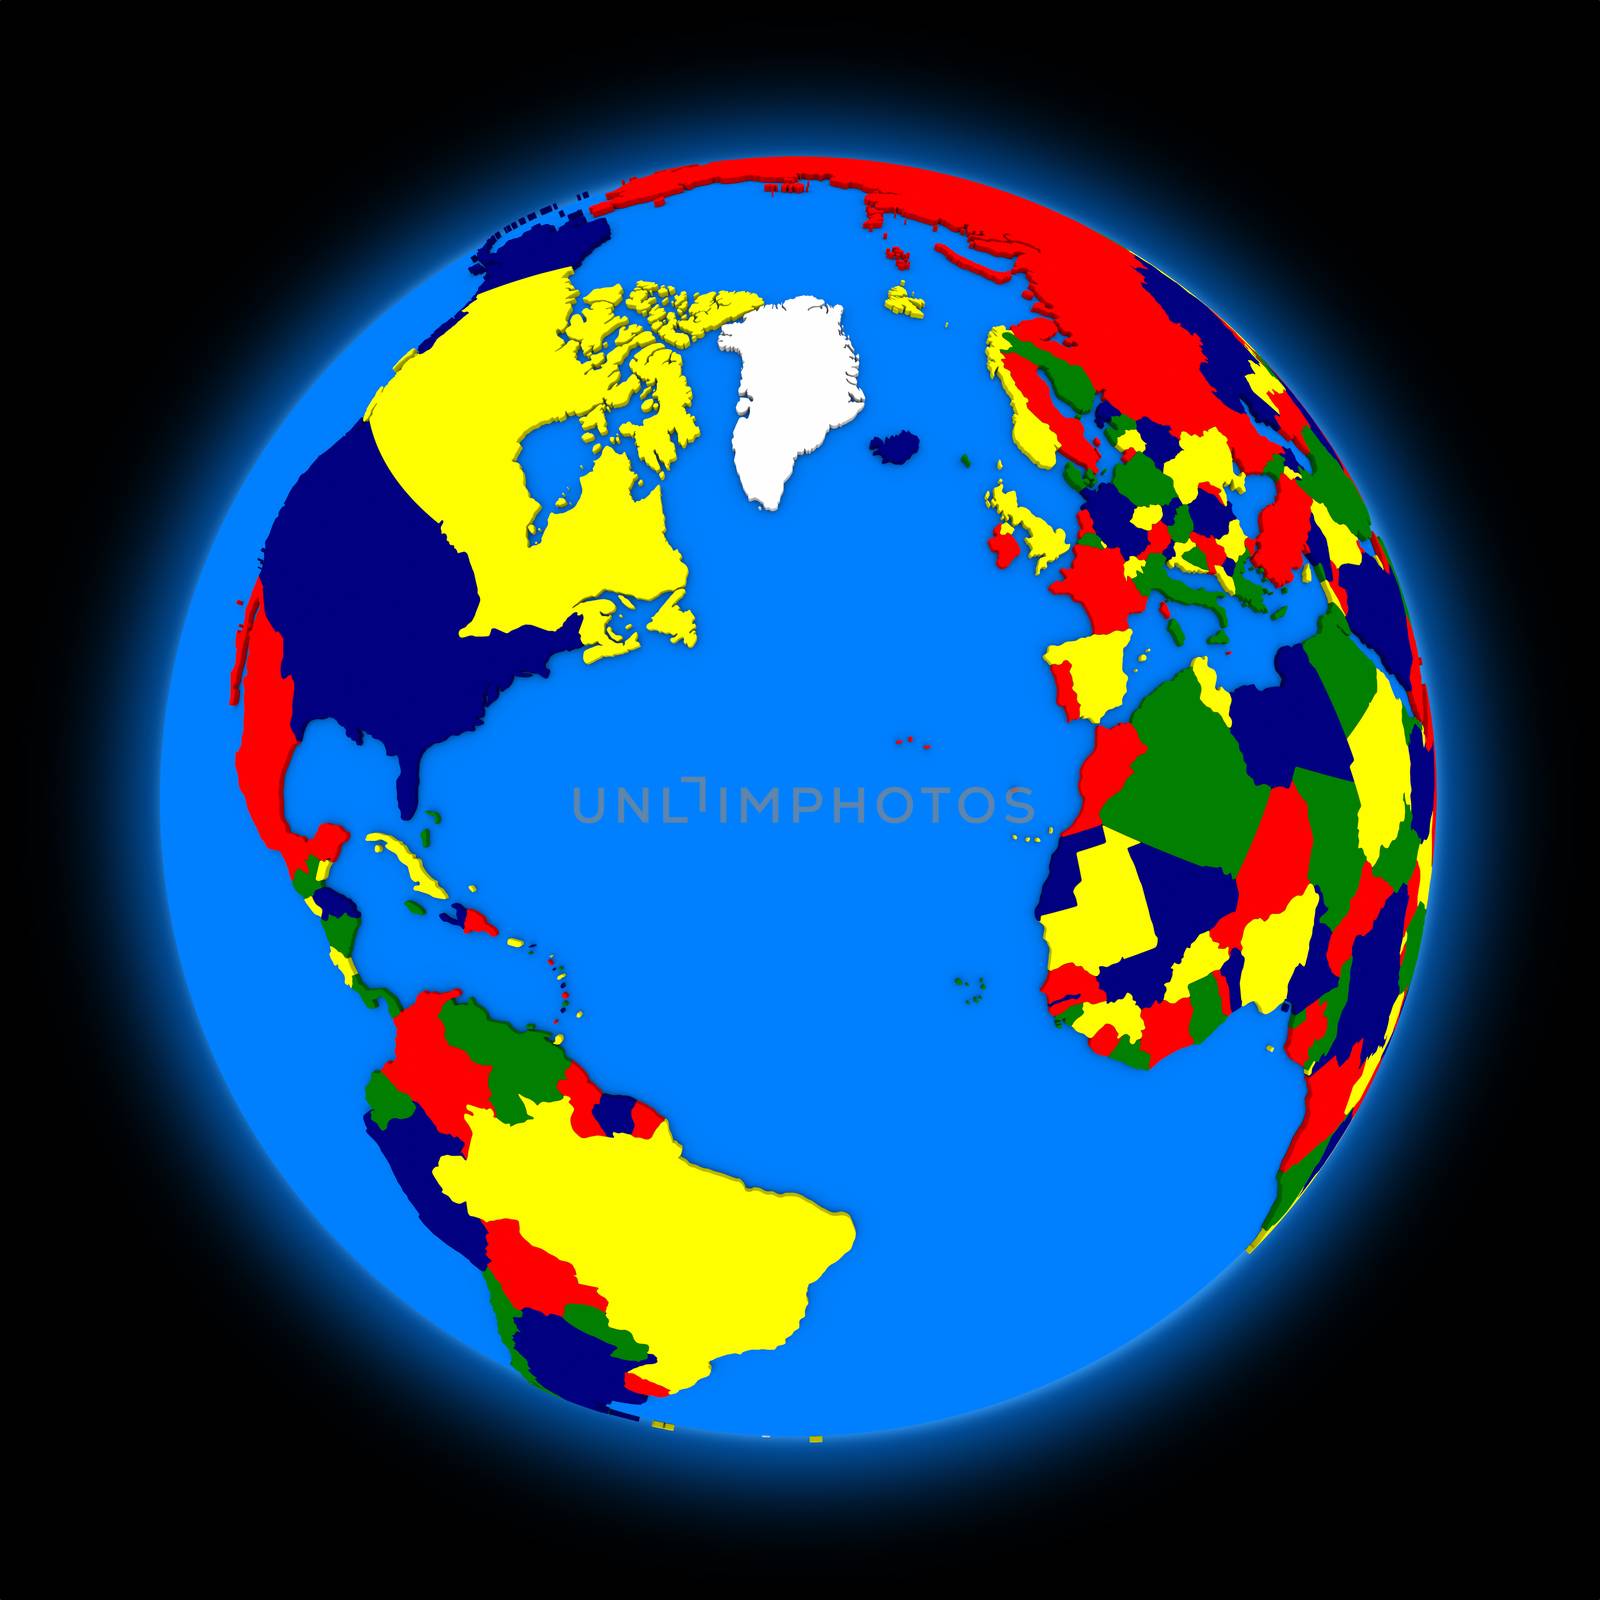 Northern hemisphere on planet Earth by Harvepino